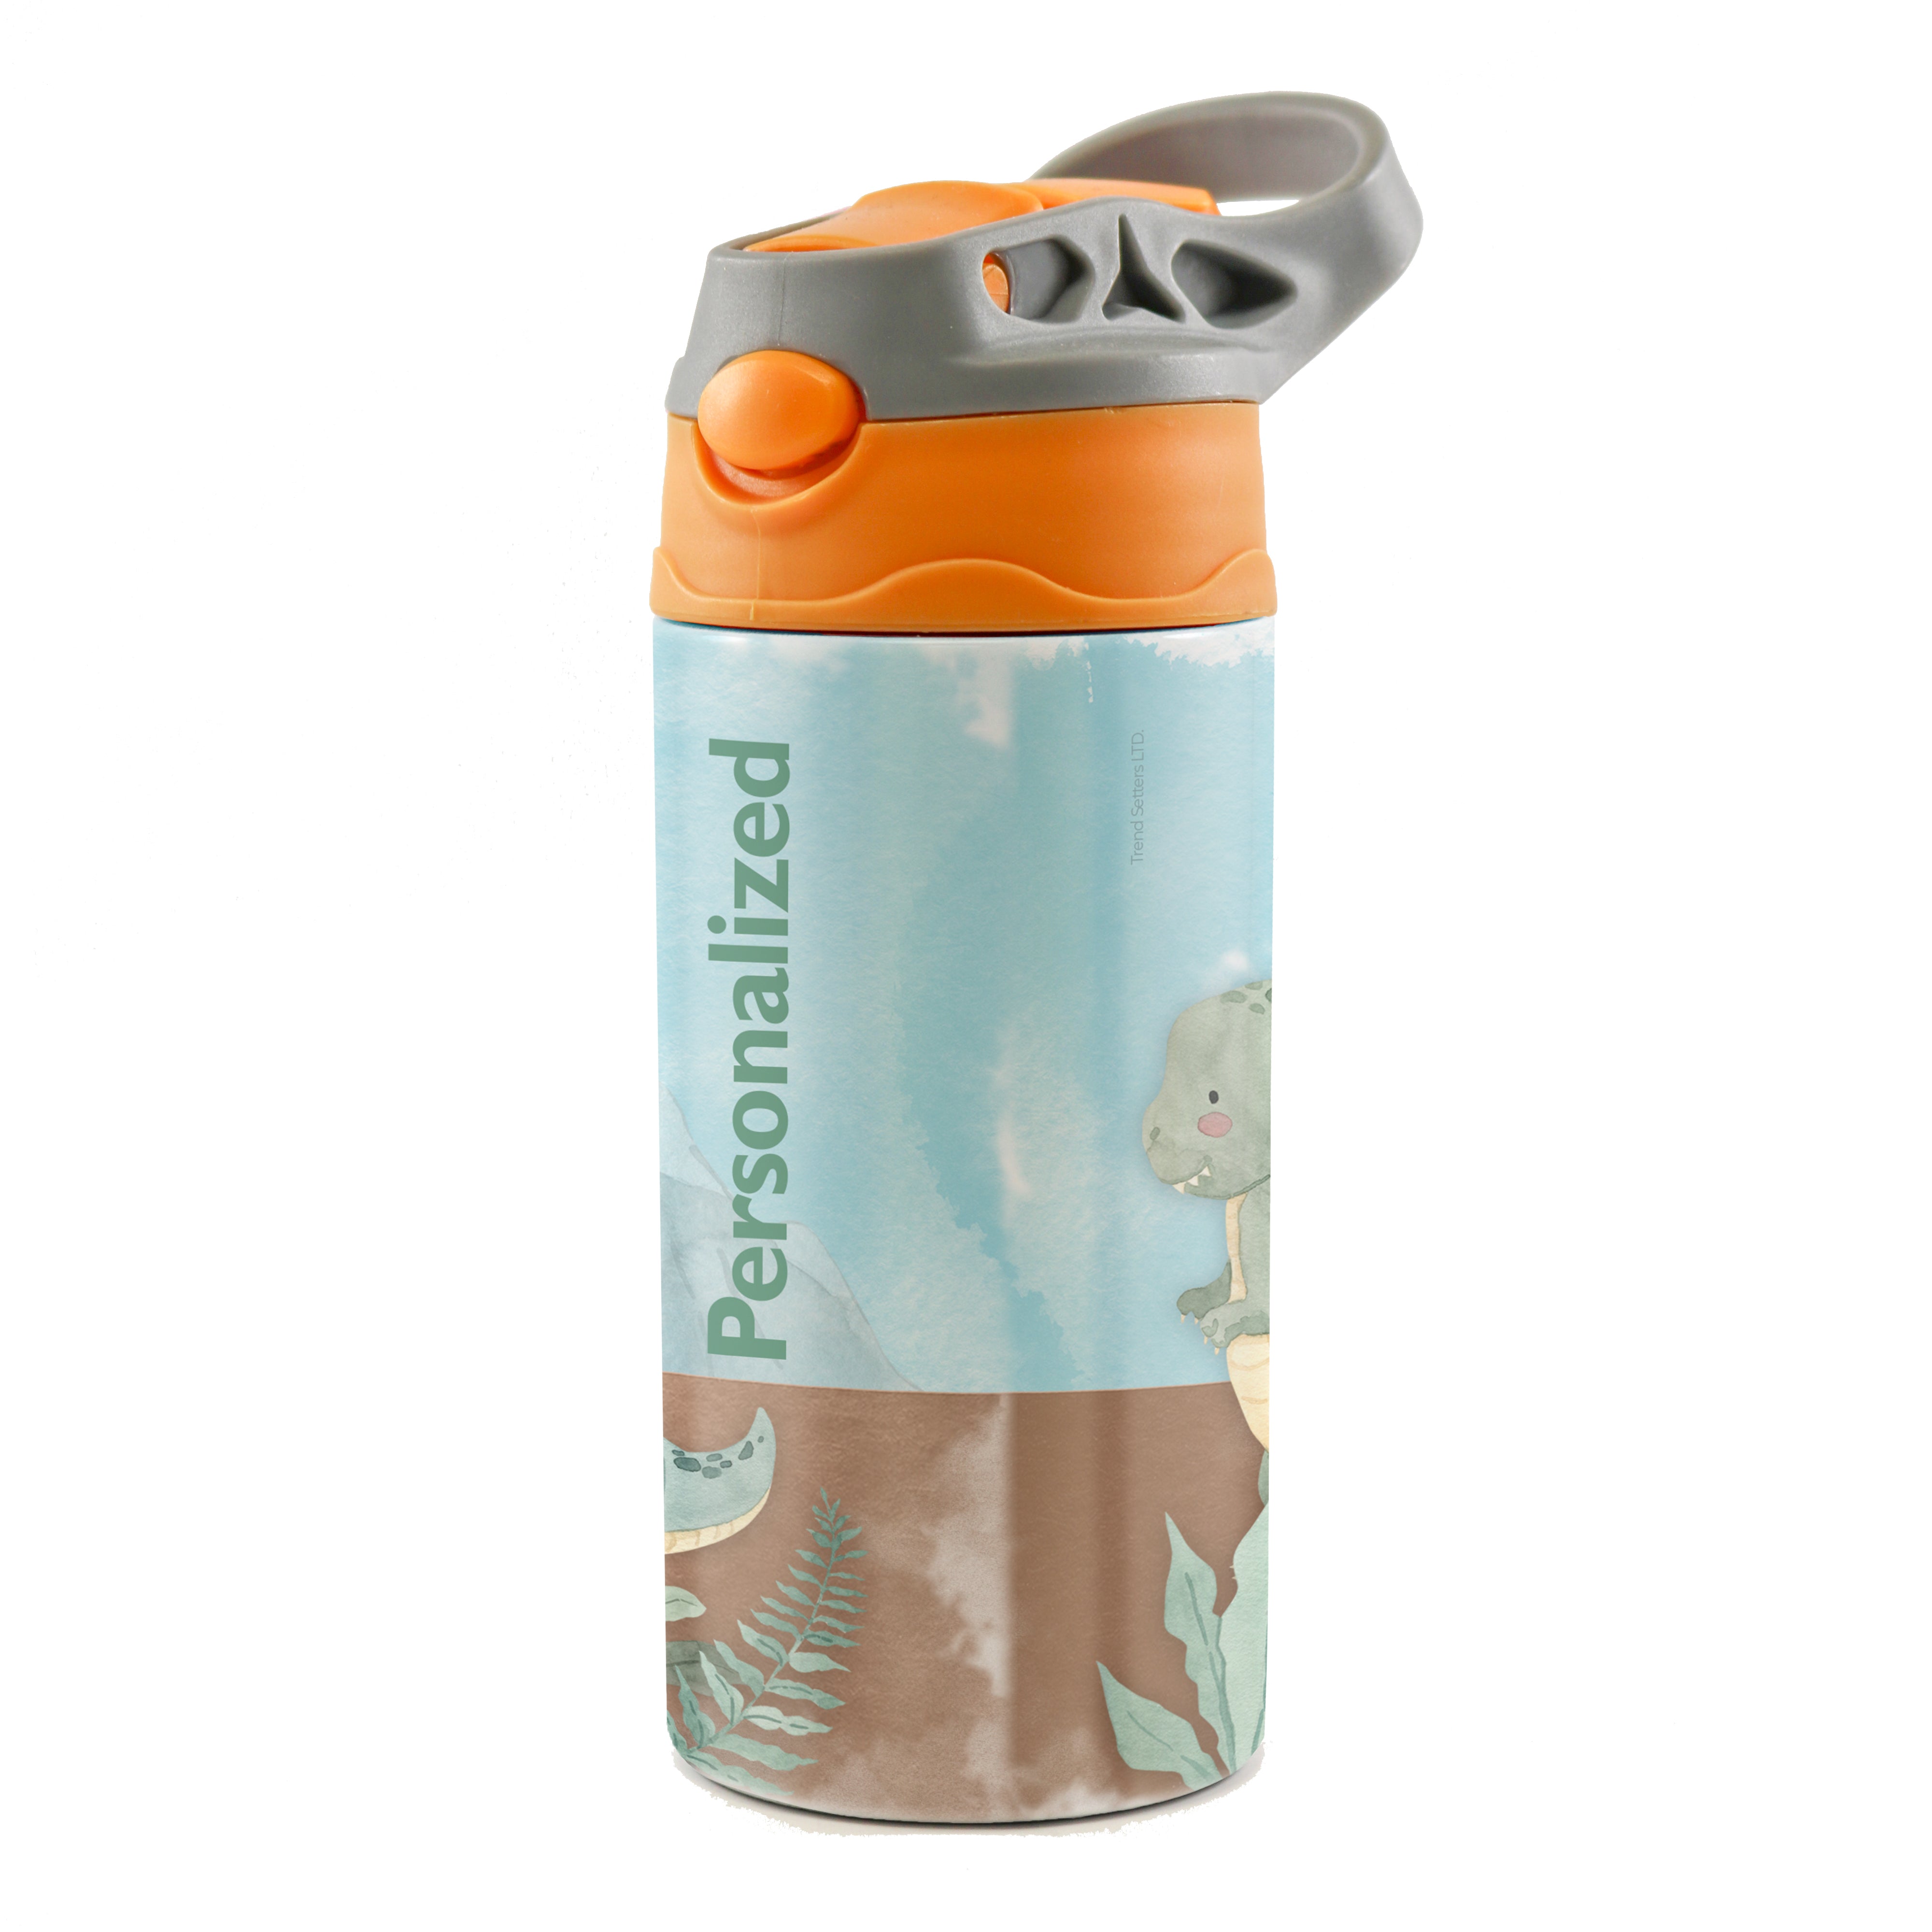 Trend Setters Original (Dinosaurs - Personalize with Name) 12 oz Stainless Steel Water Bottle with Orange and Grey Lid